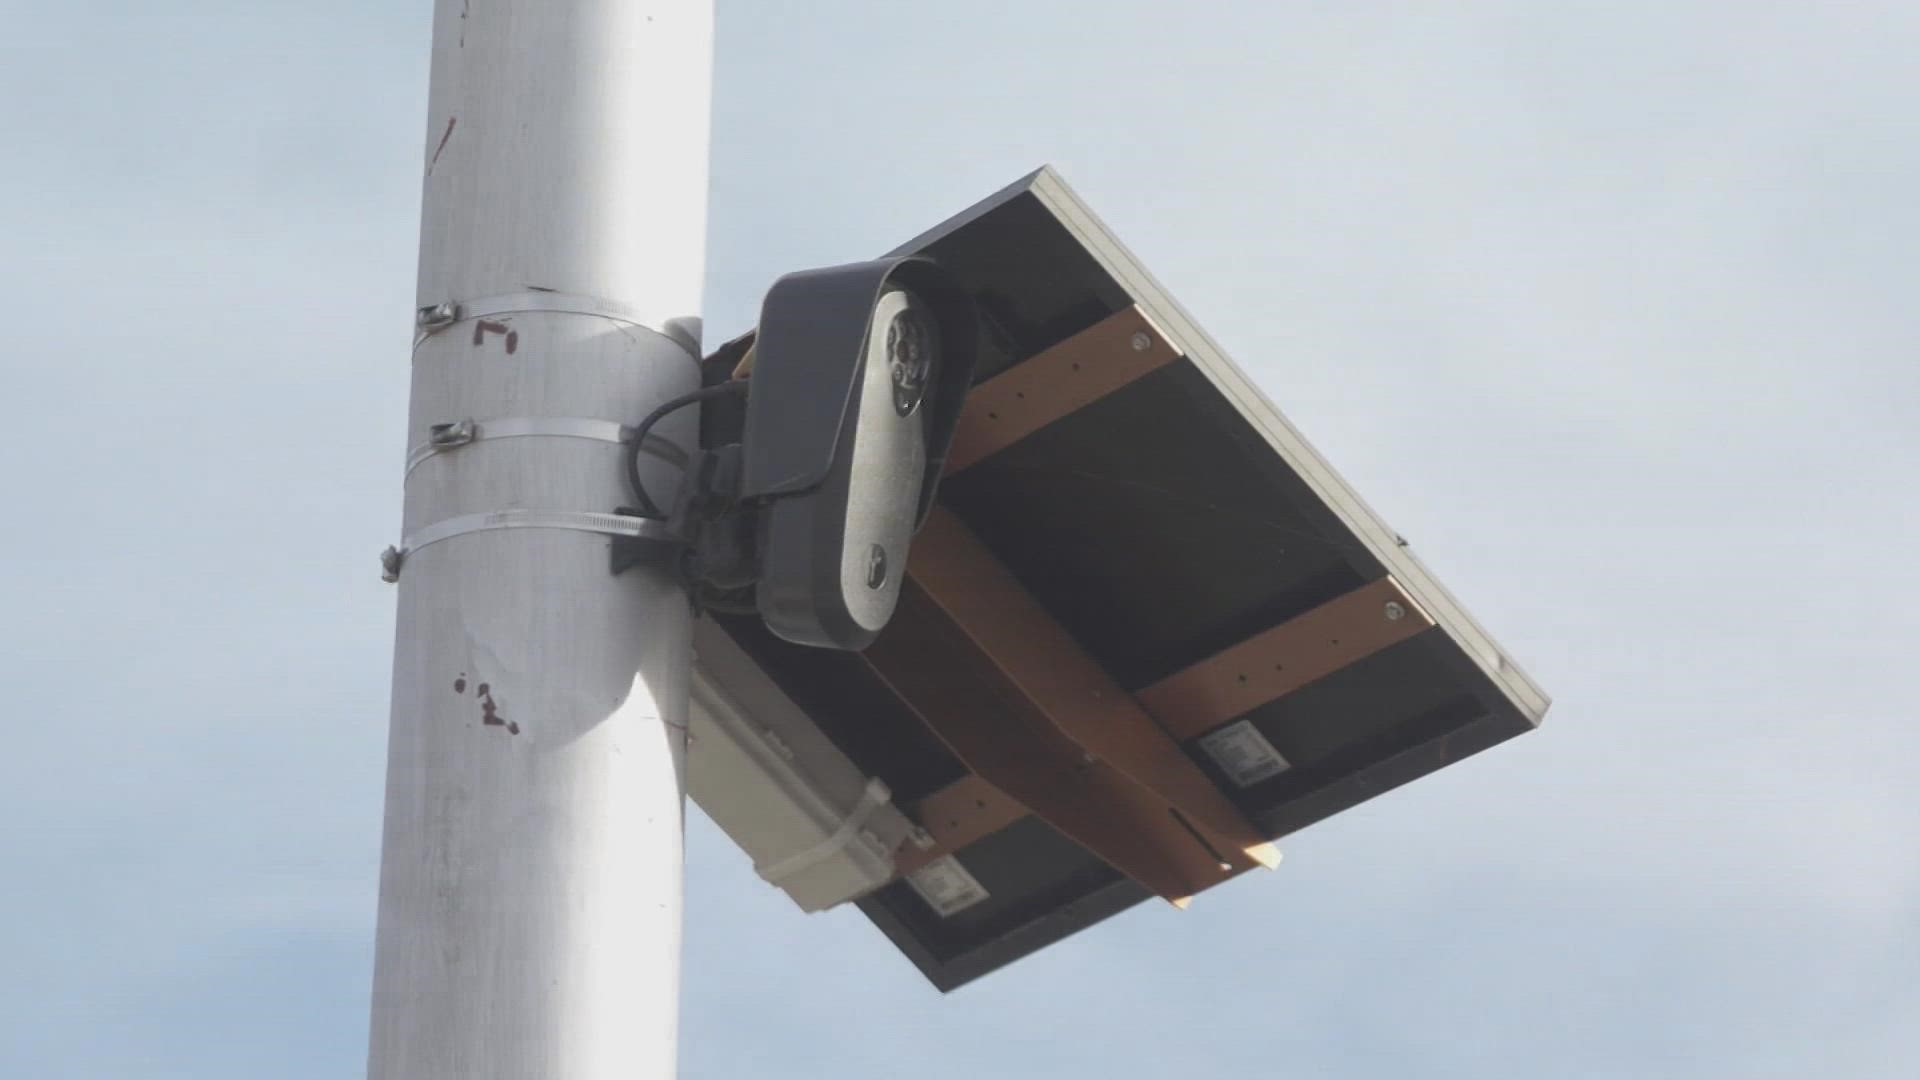 Fort Worth police officers have increased their crime fighting efforts with the "flock safety cameras".